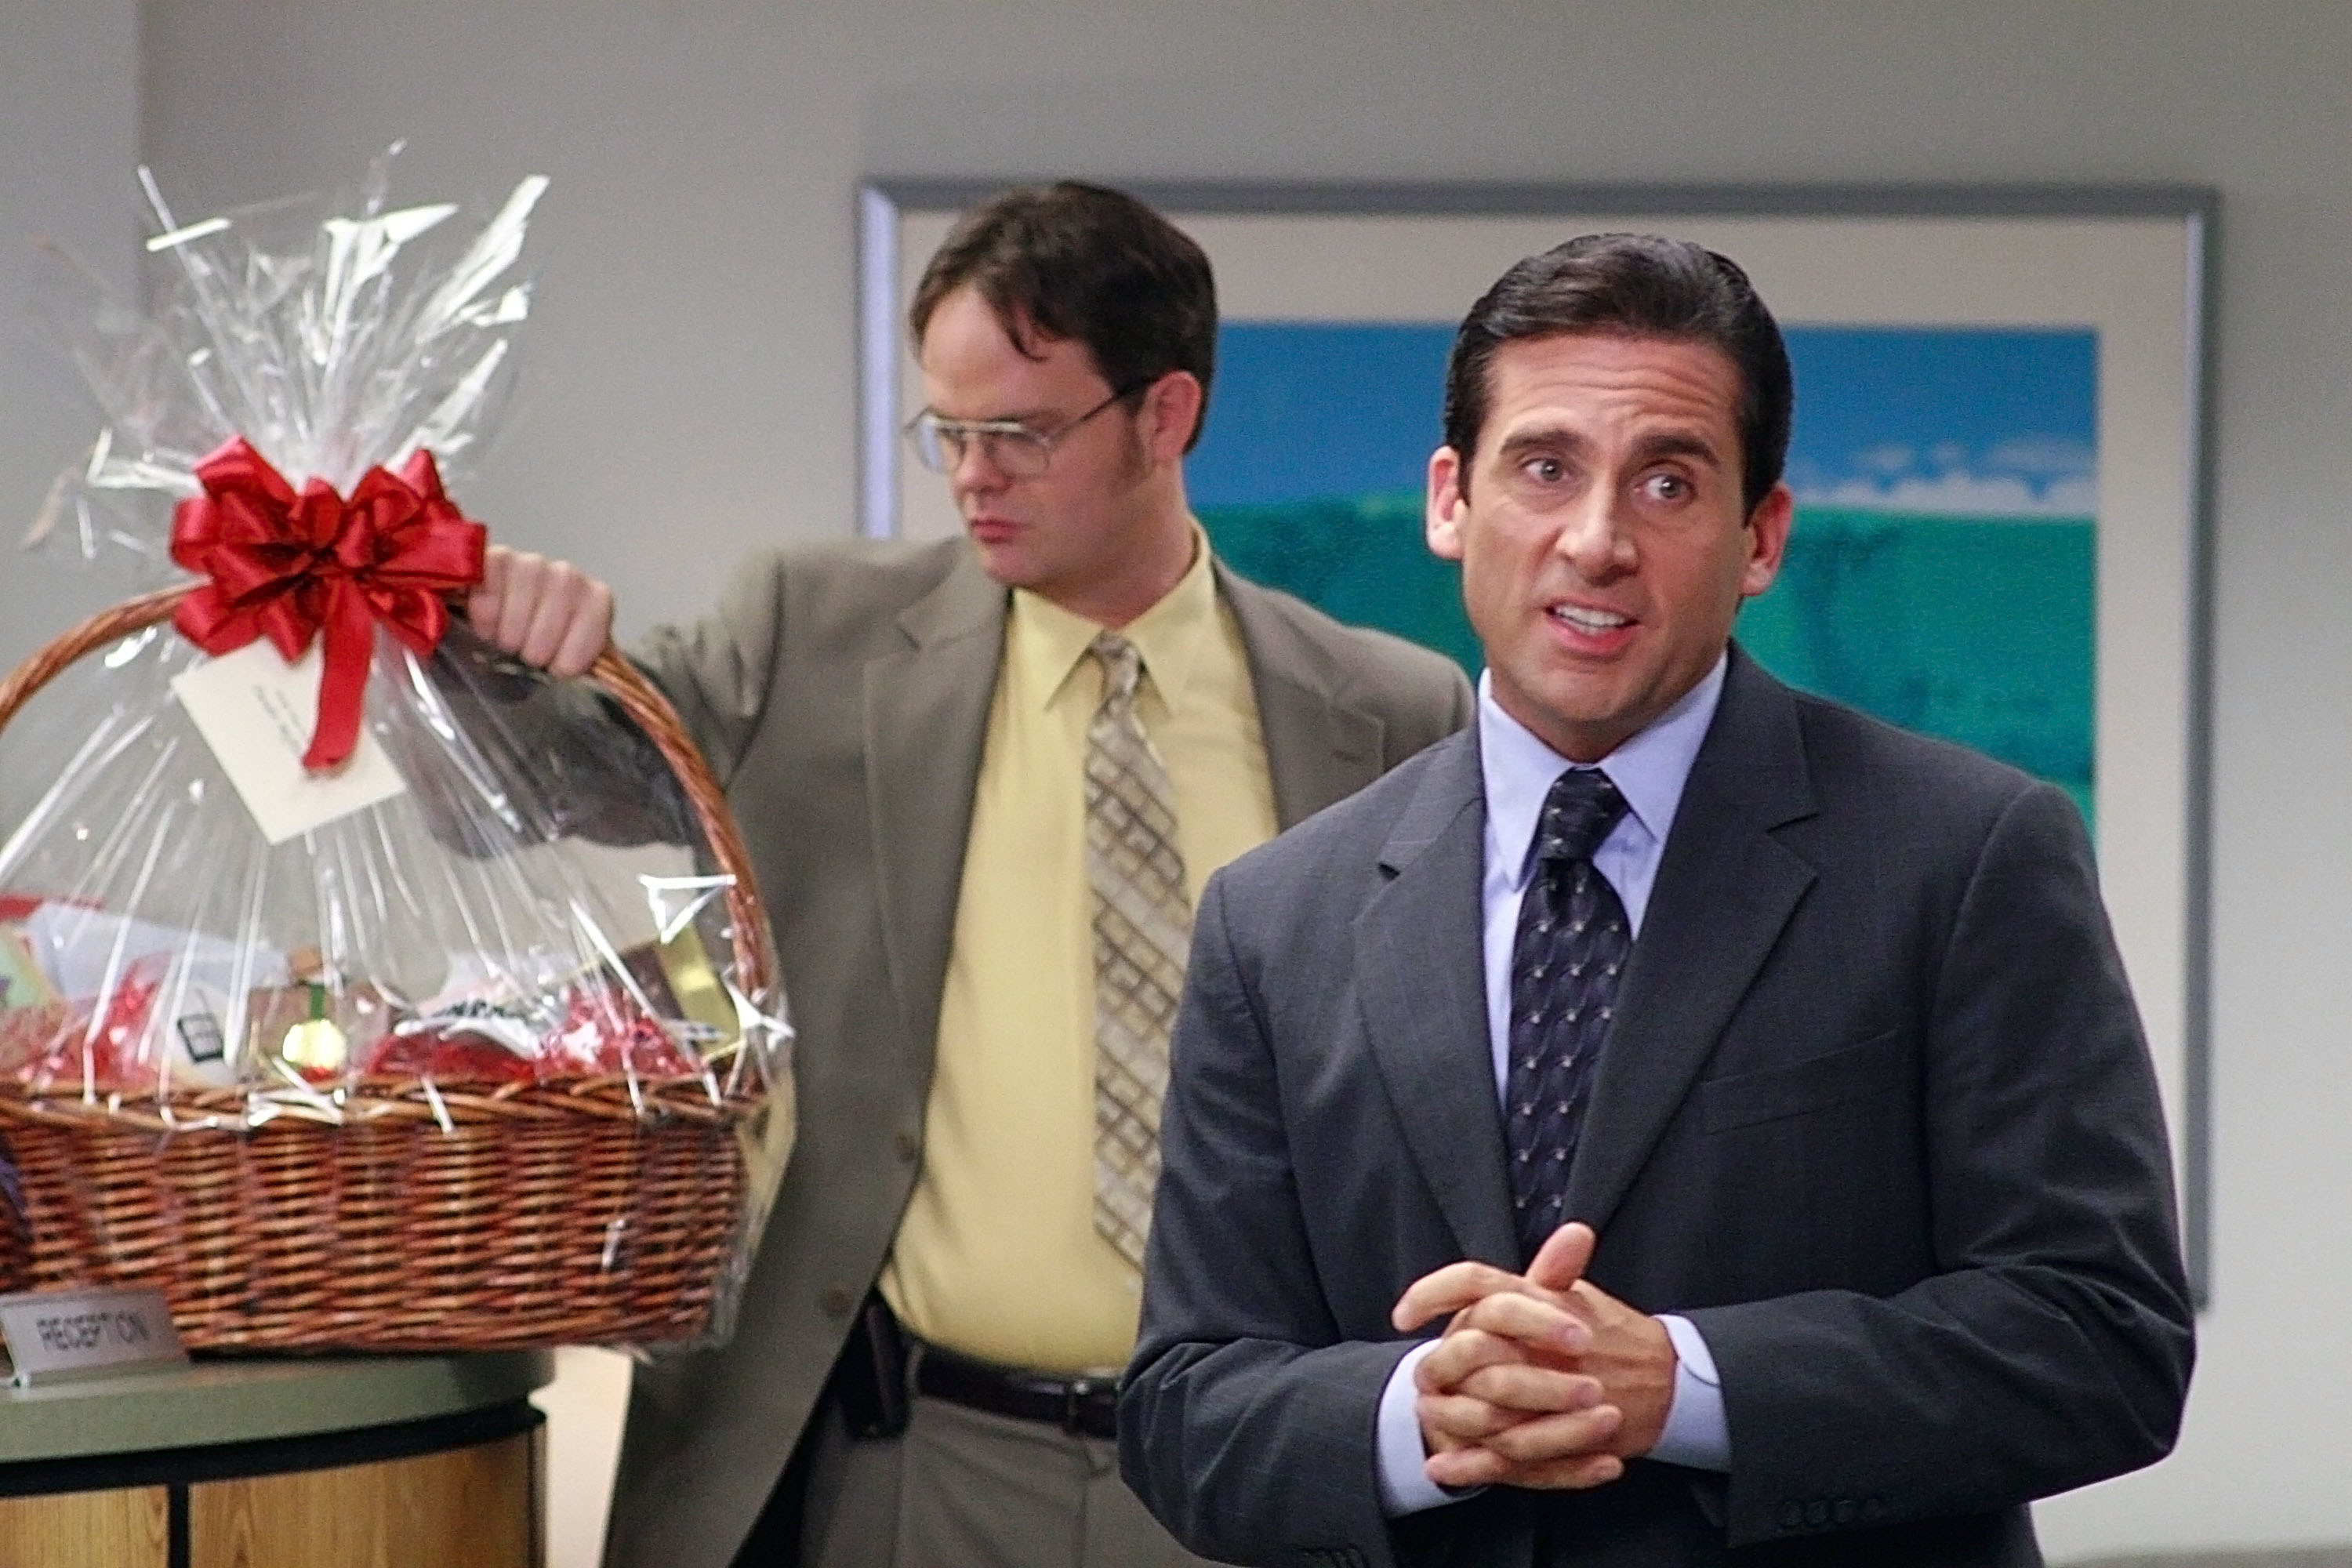 Steve Carell stands in front of Rainn Wilson and a gift basket in the office